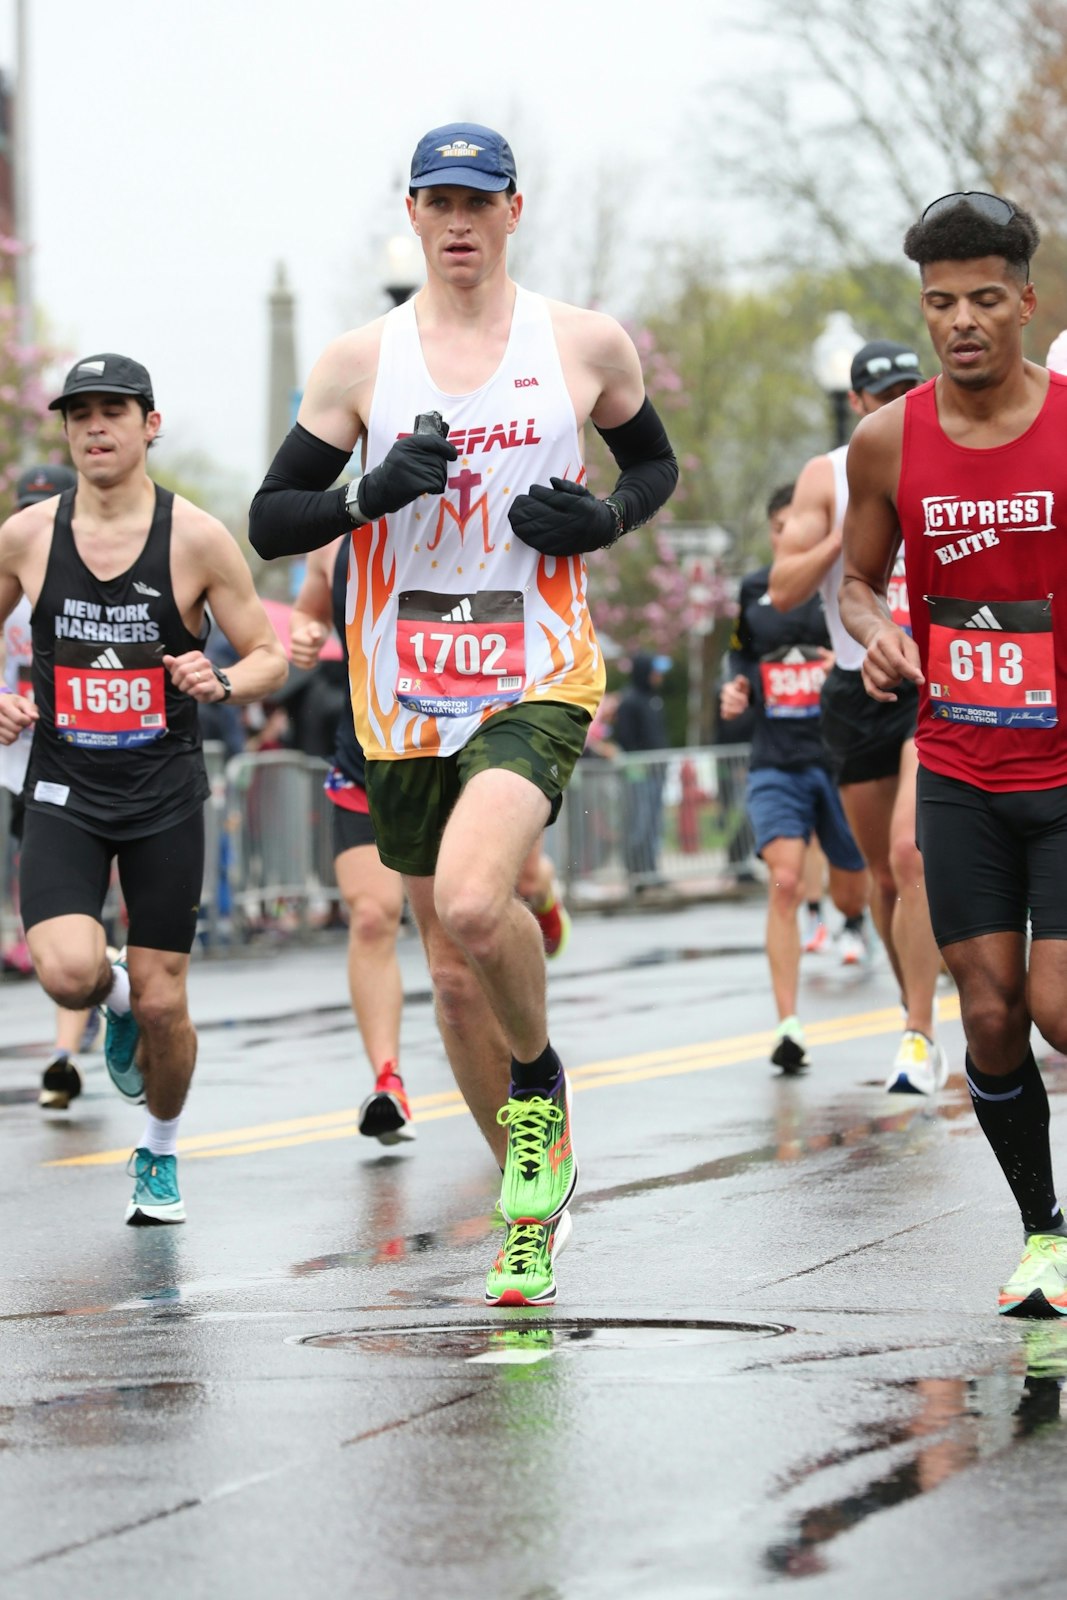 Deacon Kettner (pictured) and Conner wore special "Firefall" team jerseys during the marathon, a reference to Acts 1:8, “You will receive power when the Holy Spirit comes upon you.”